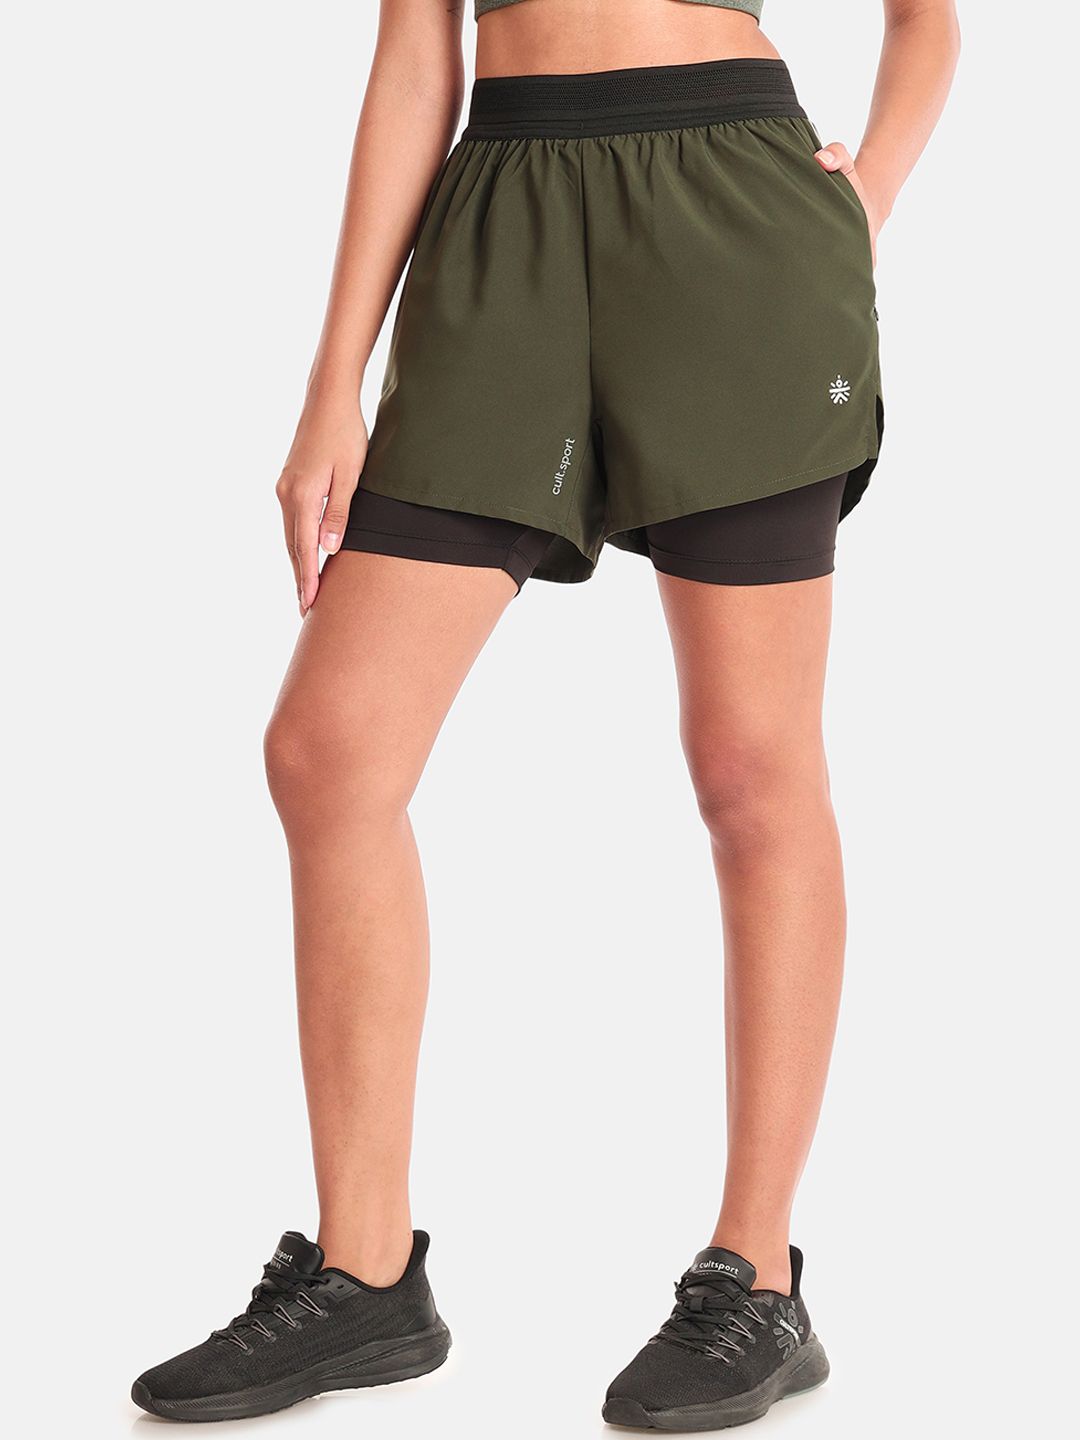 Cultsport Women Mid-Rise Sports Shorts Price in India